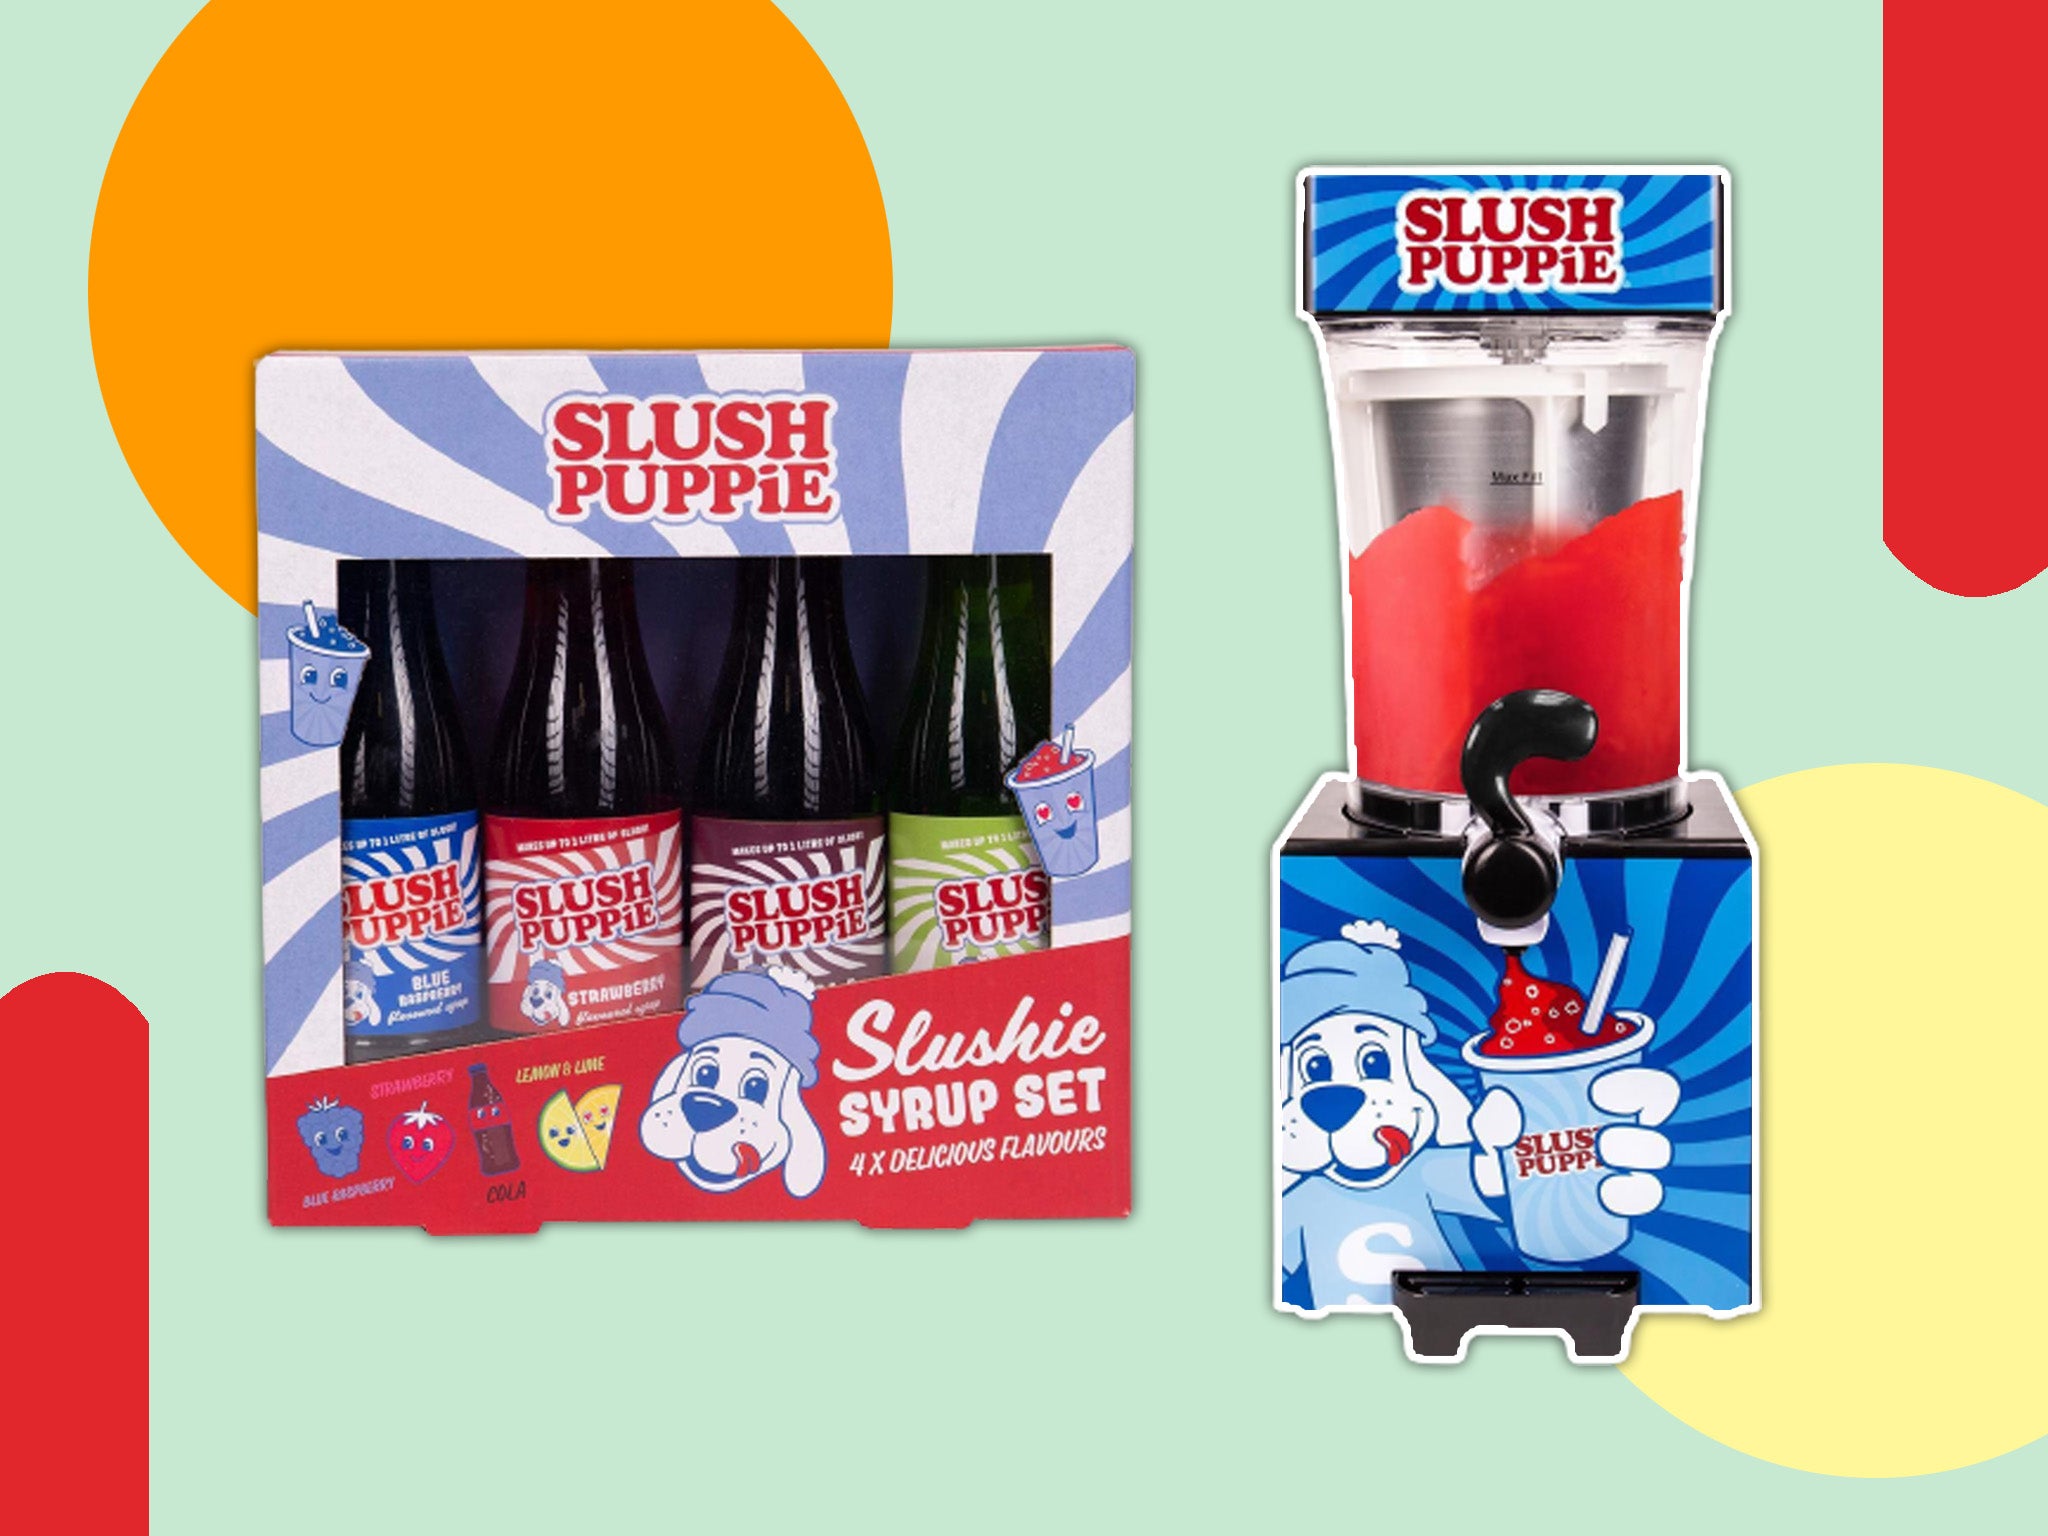 The bundle includes flavoured syrups, paper cups and straws